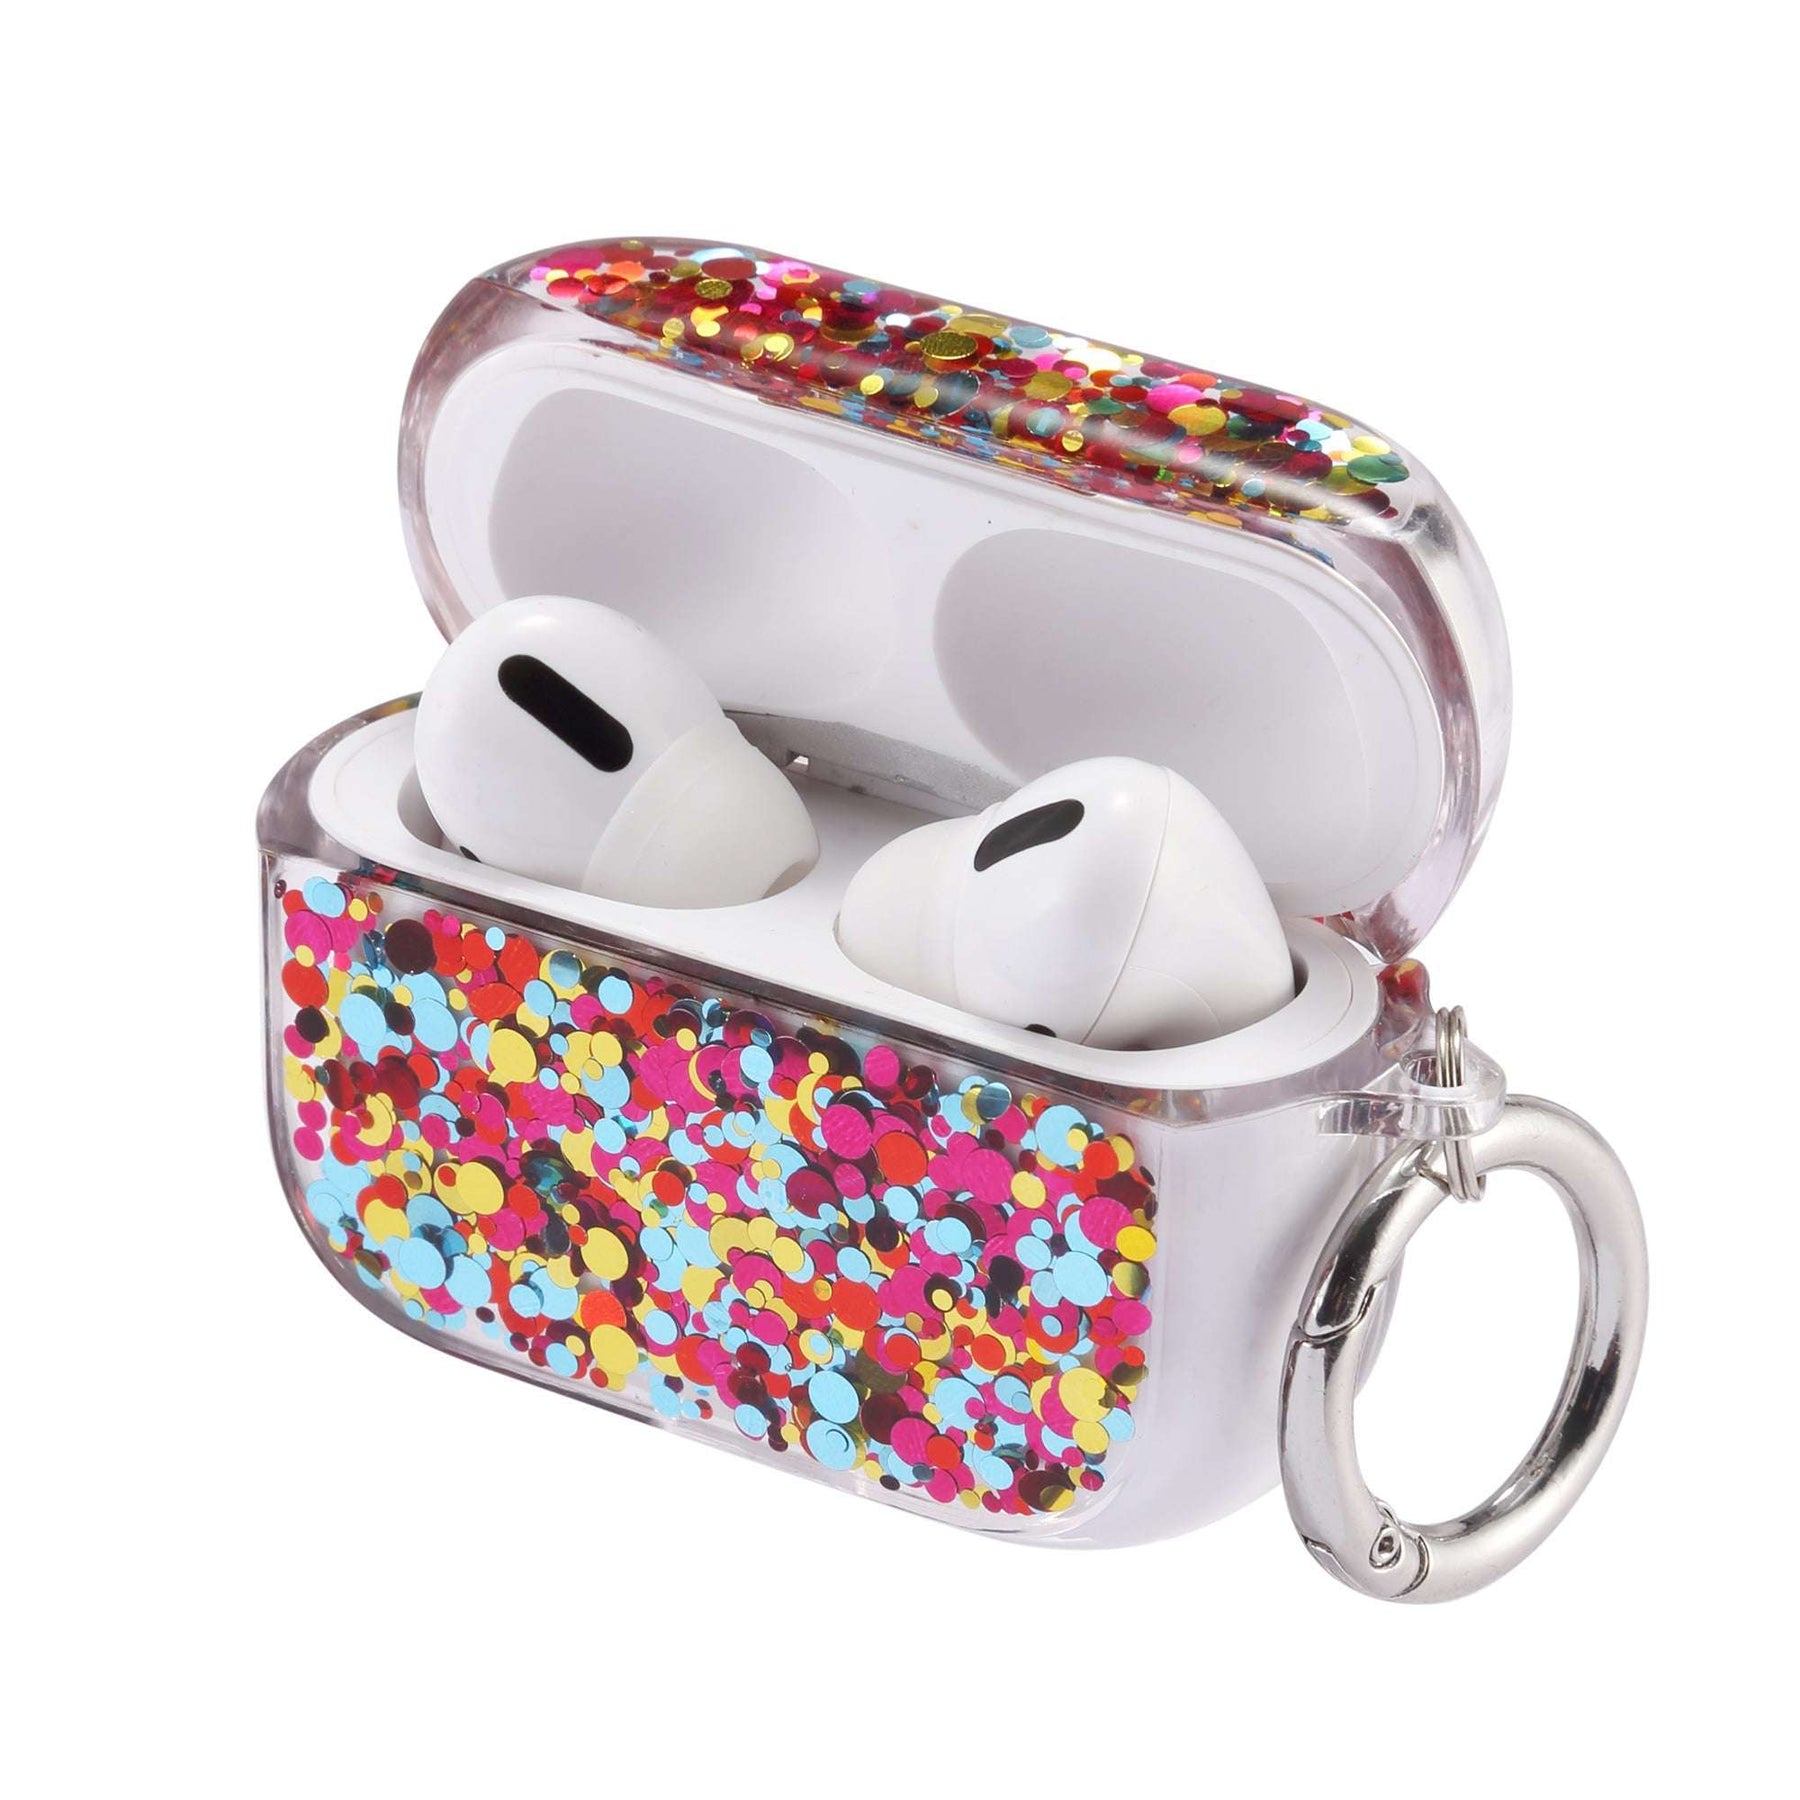 Apple Airpods Pro Charging Case Cover Luxury Novelty Glitter